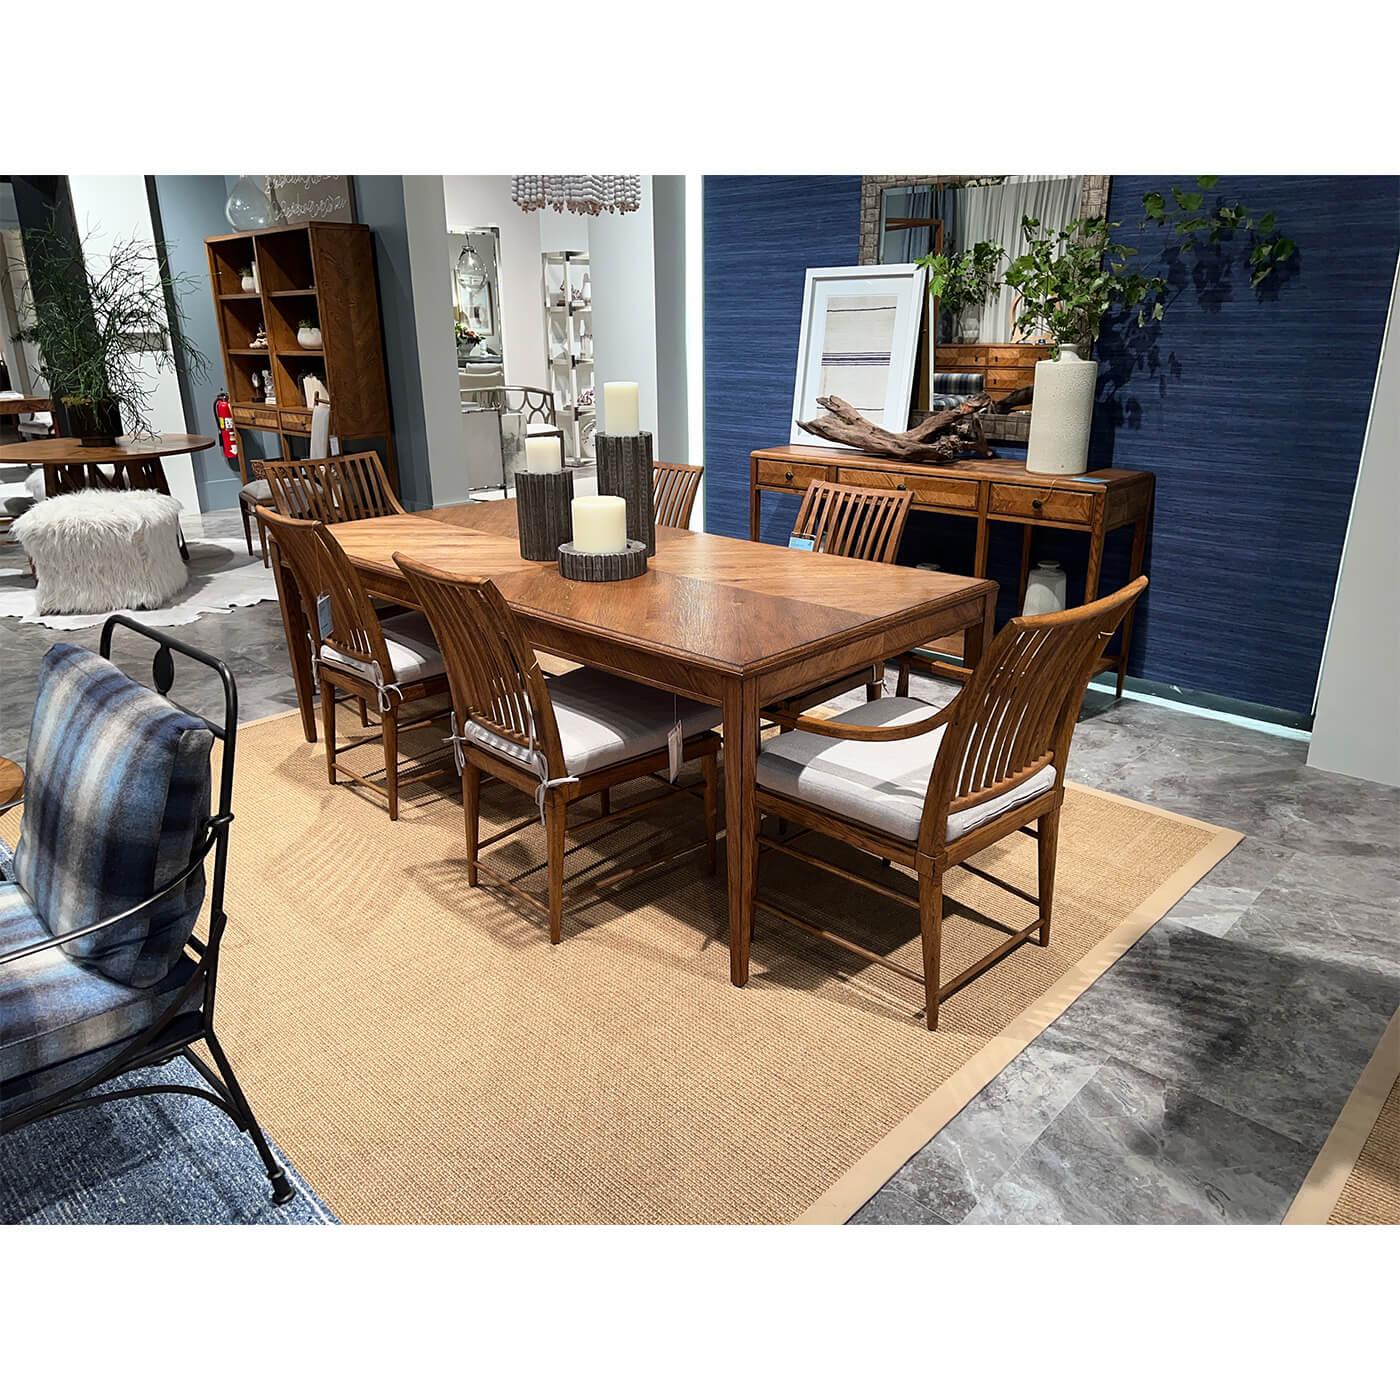 modern rustic dining table